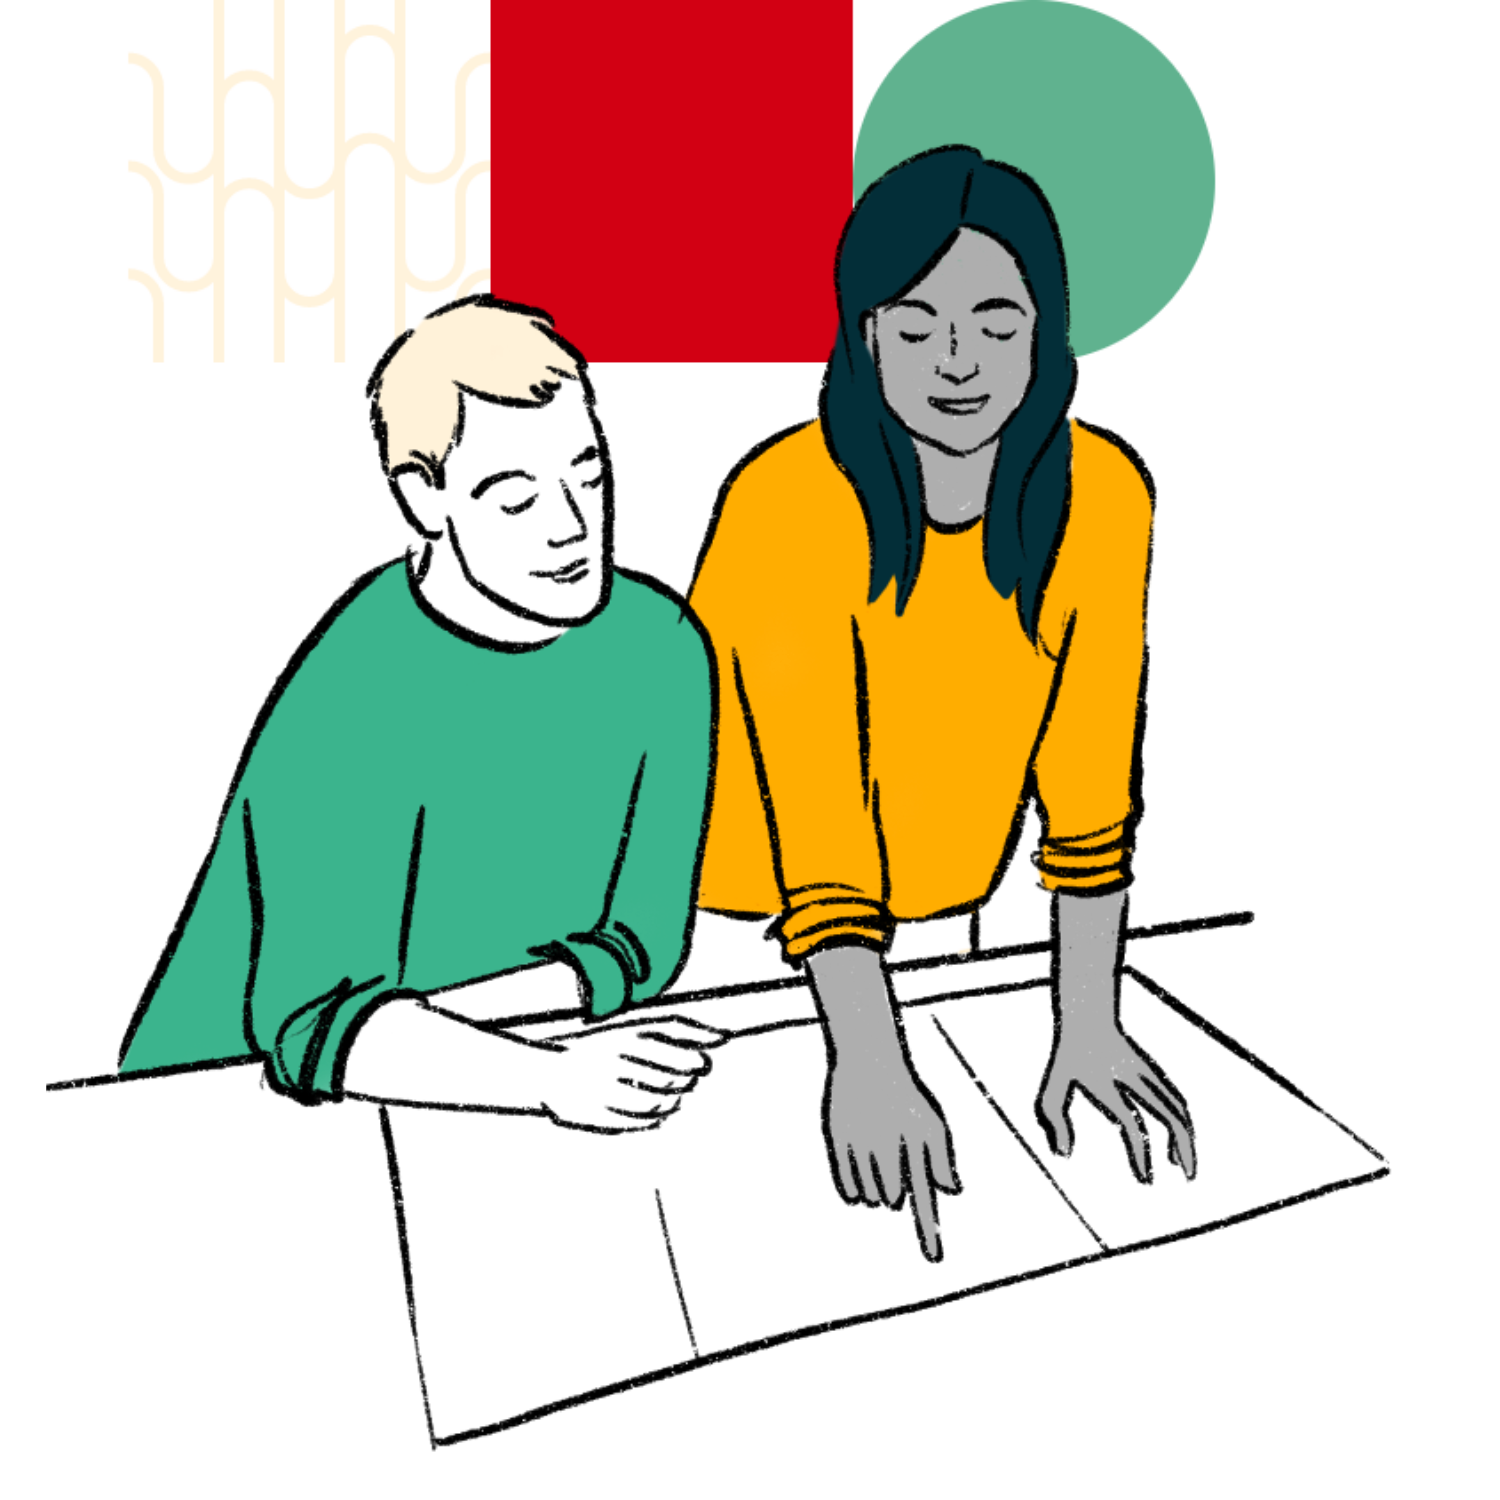 two people looking at plans